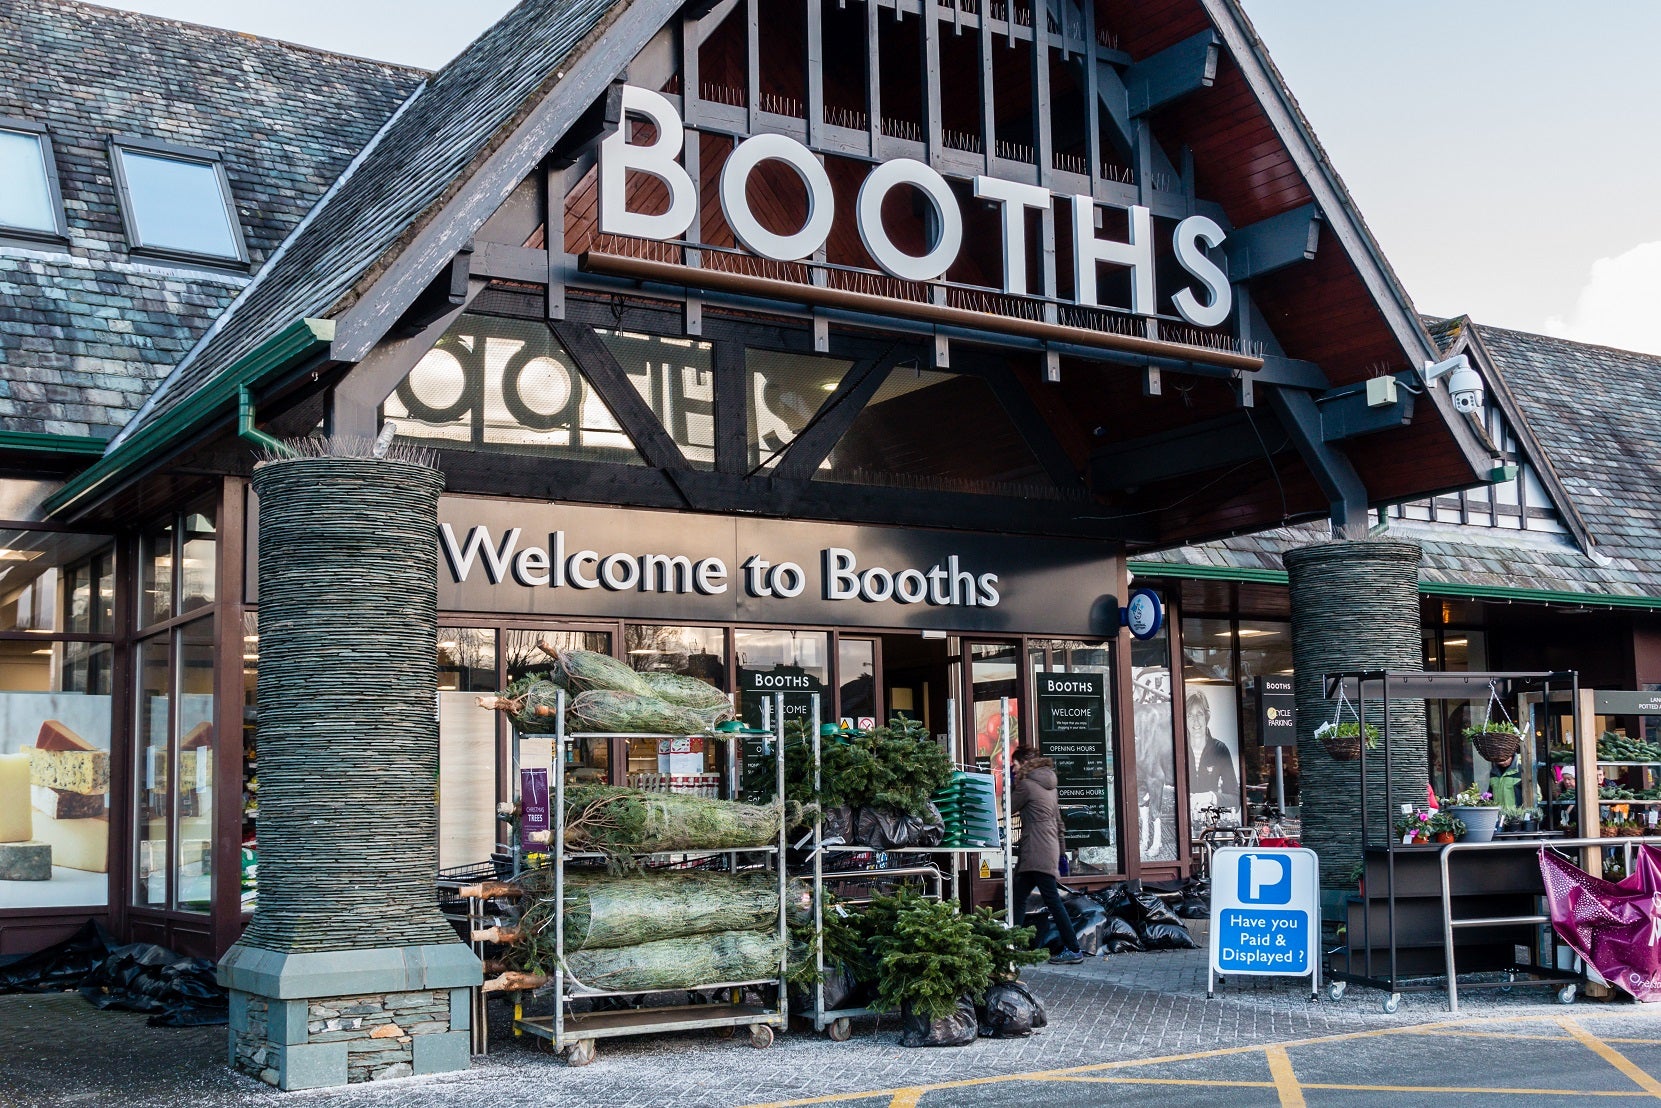 Booths confirmed as UK retailer linked to alleged case of food fraud